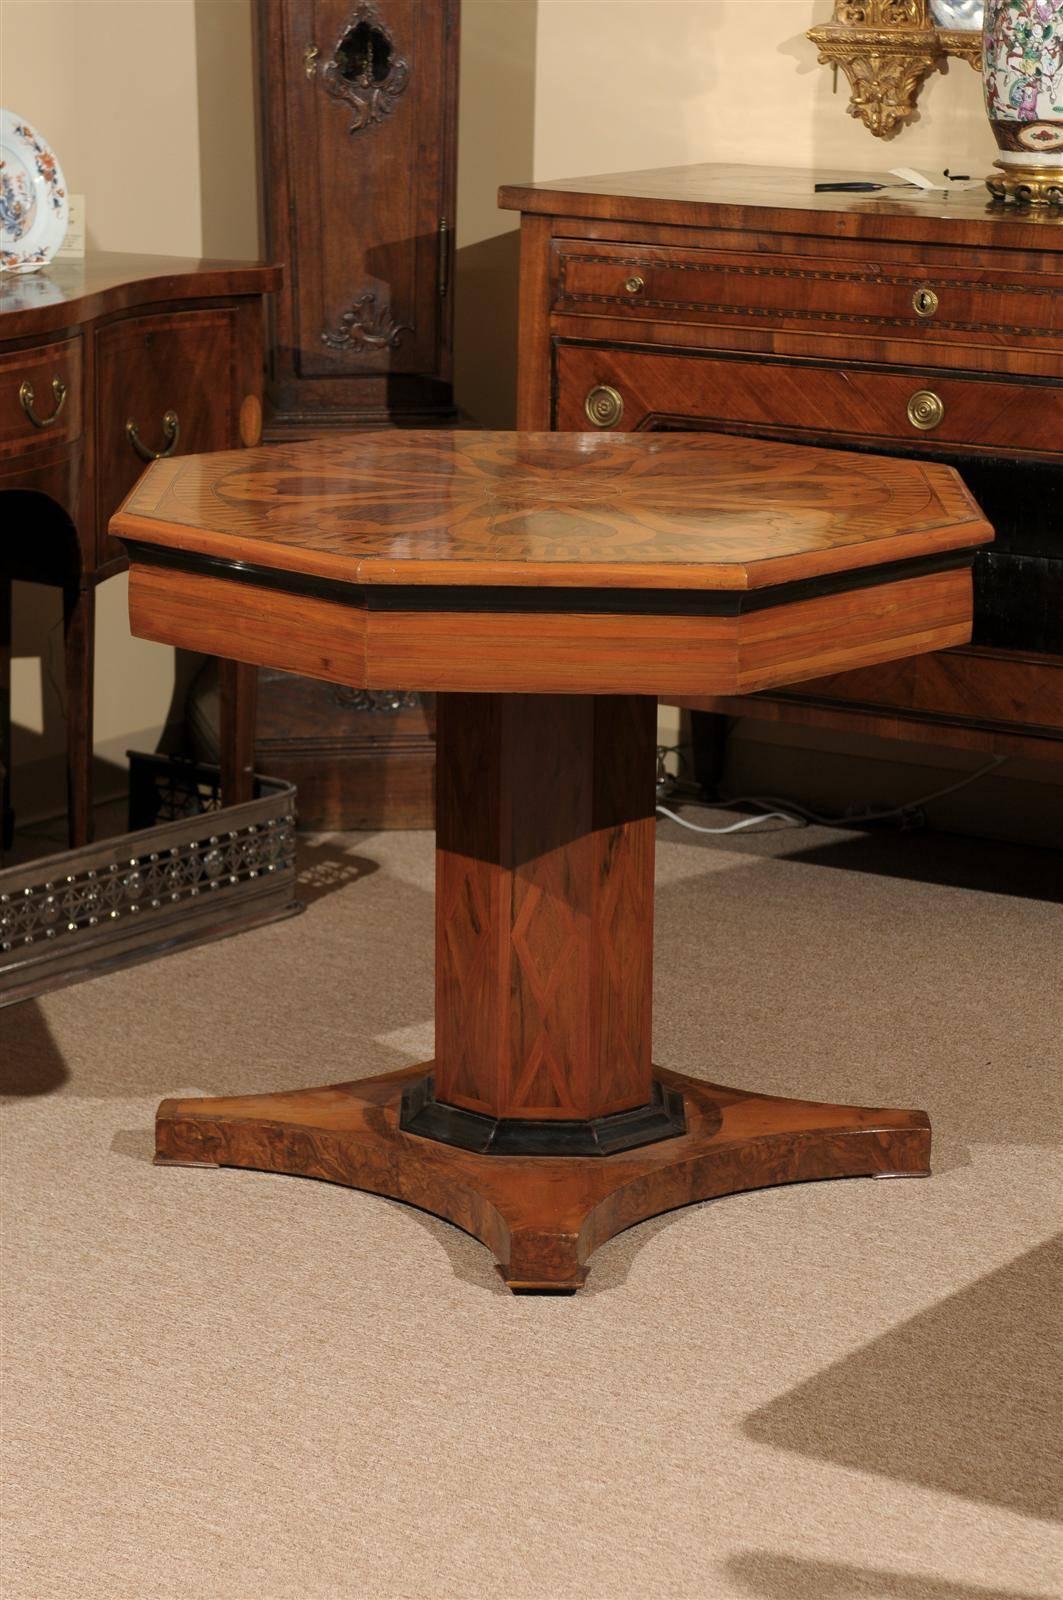 A 19th century Italian neoclassical style octagonal center table with parquetry inlay and pedestal base. 